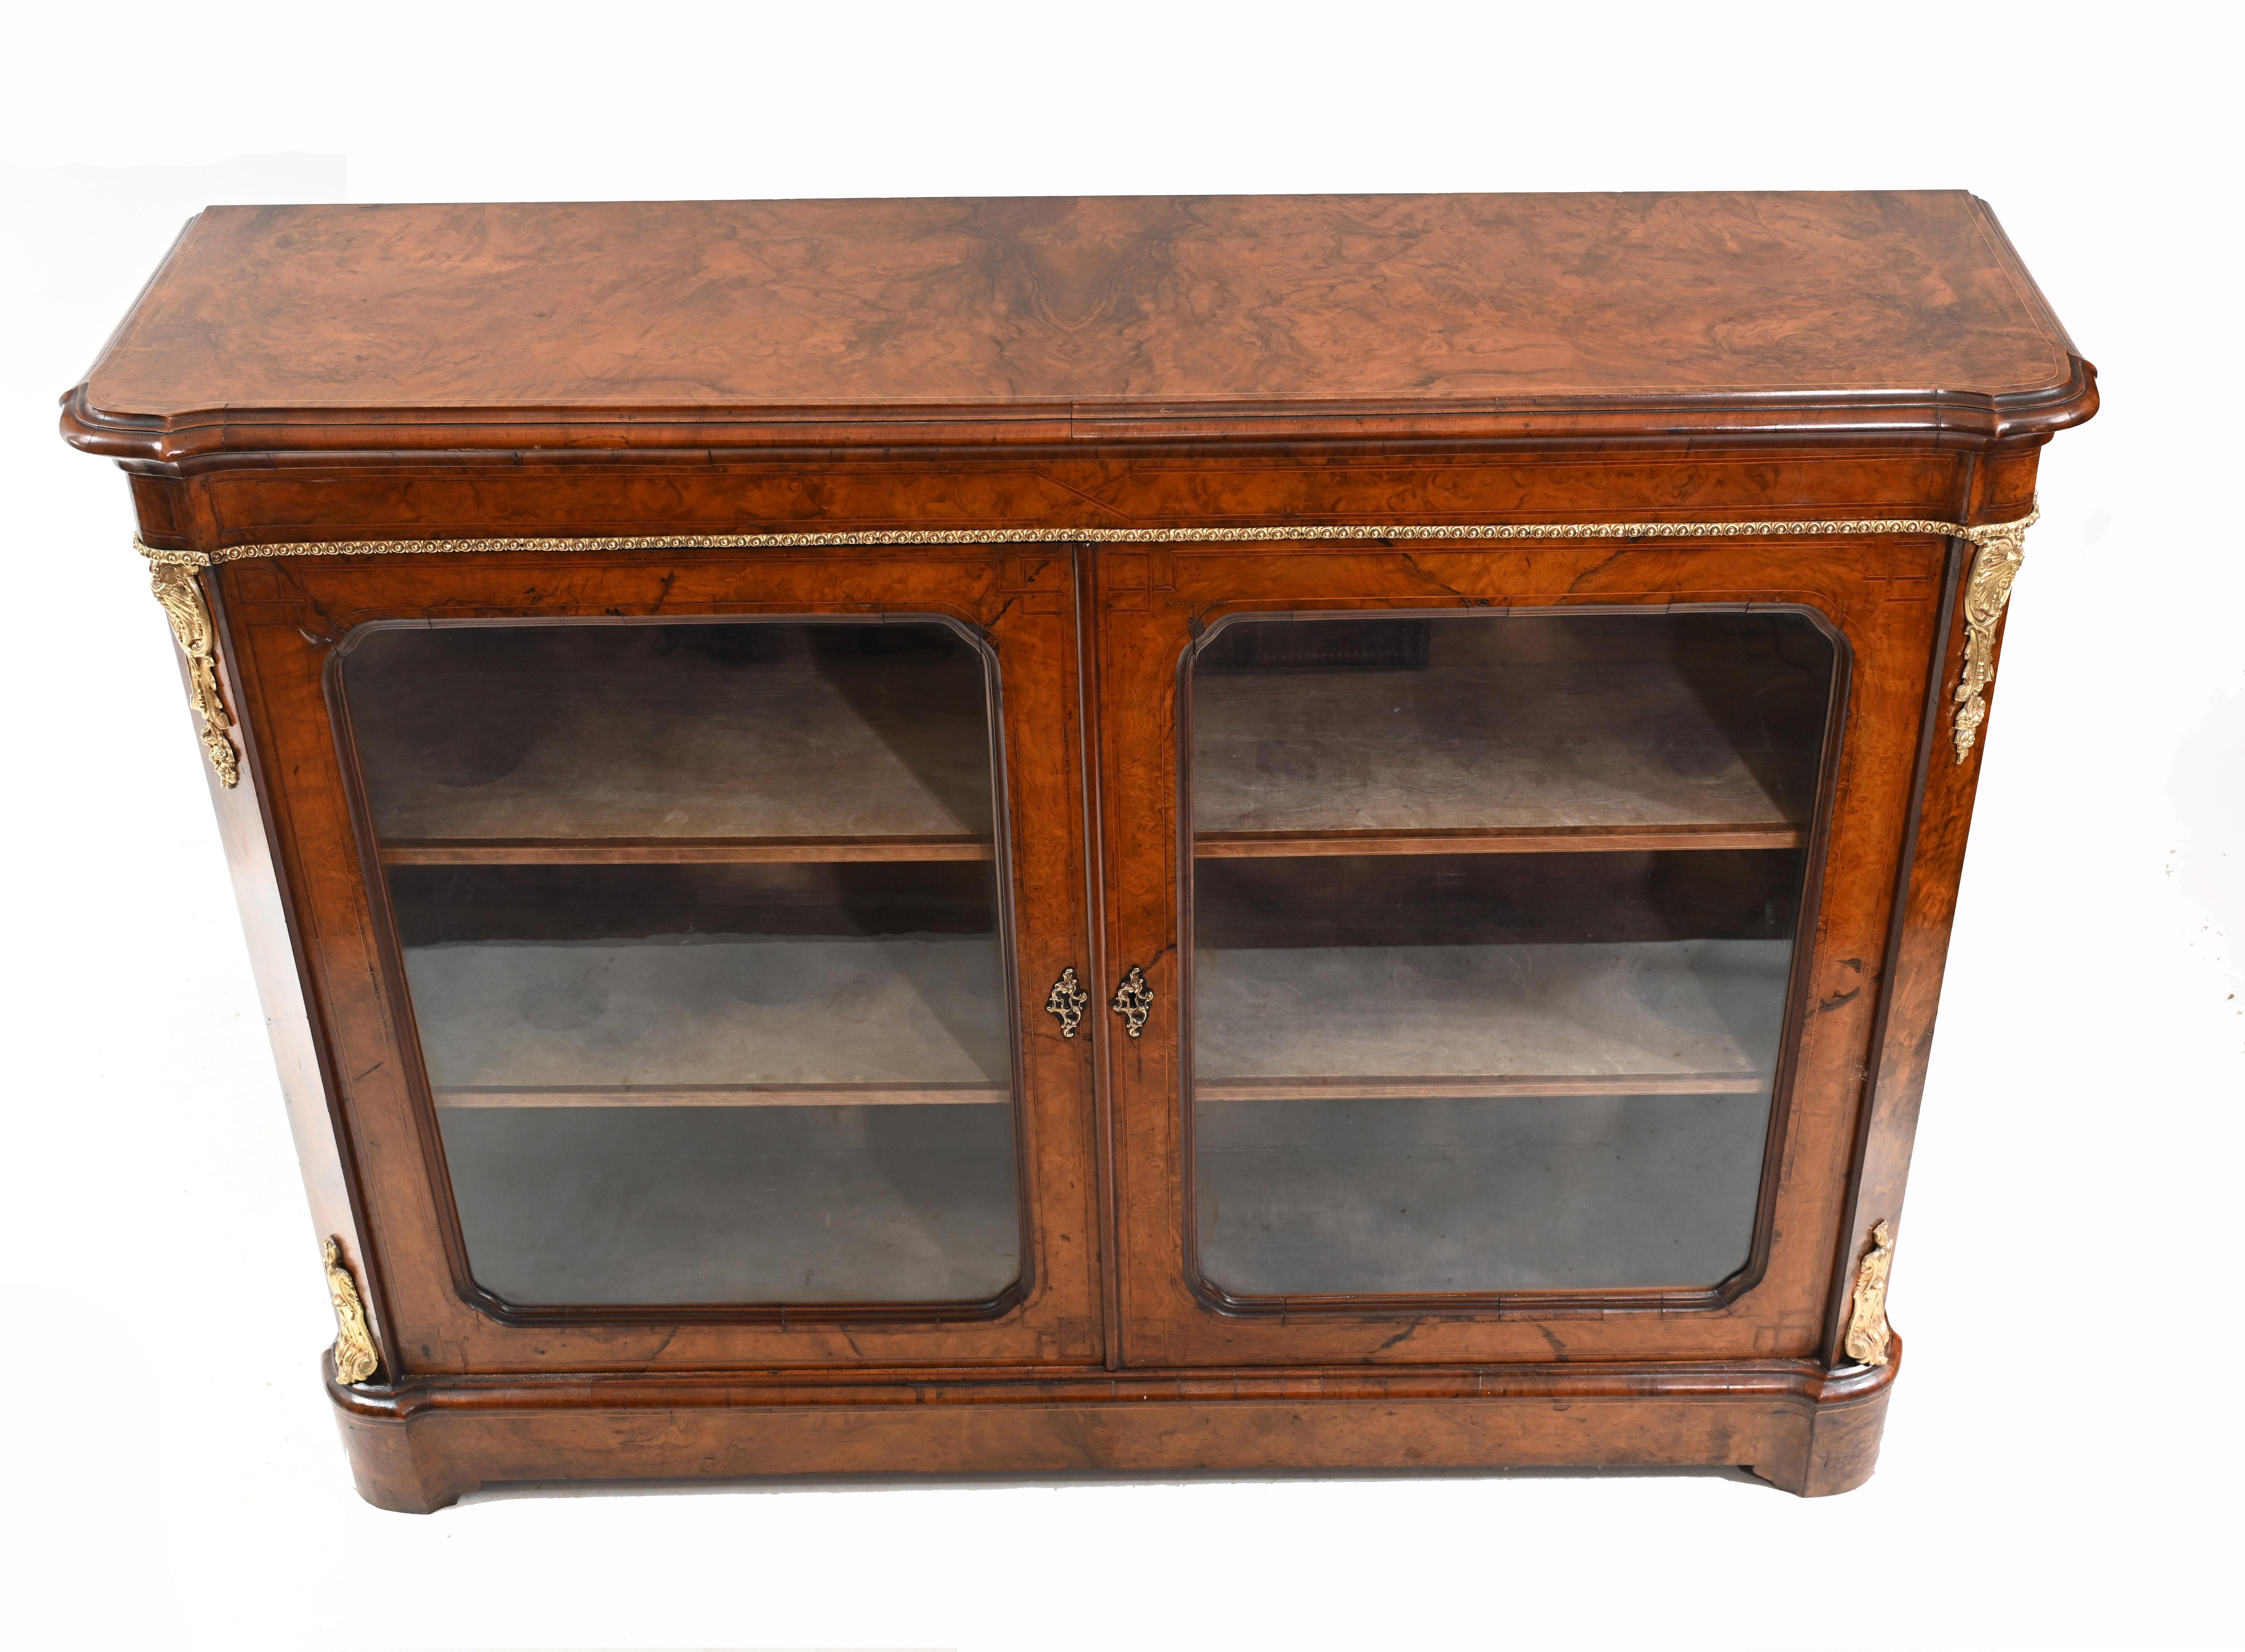 Gorgeous two door Victorian pier cabinet
Hand crafted from burr walnut and dated circa 1860
Gorgeous piece of furniture
Bought from a dealer in Petworth, West Sussex
Some of our items are in storage so please check ahead of a viewing to see if